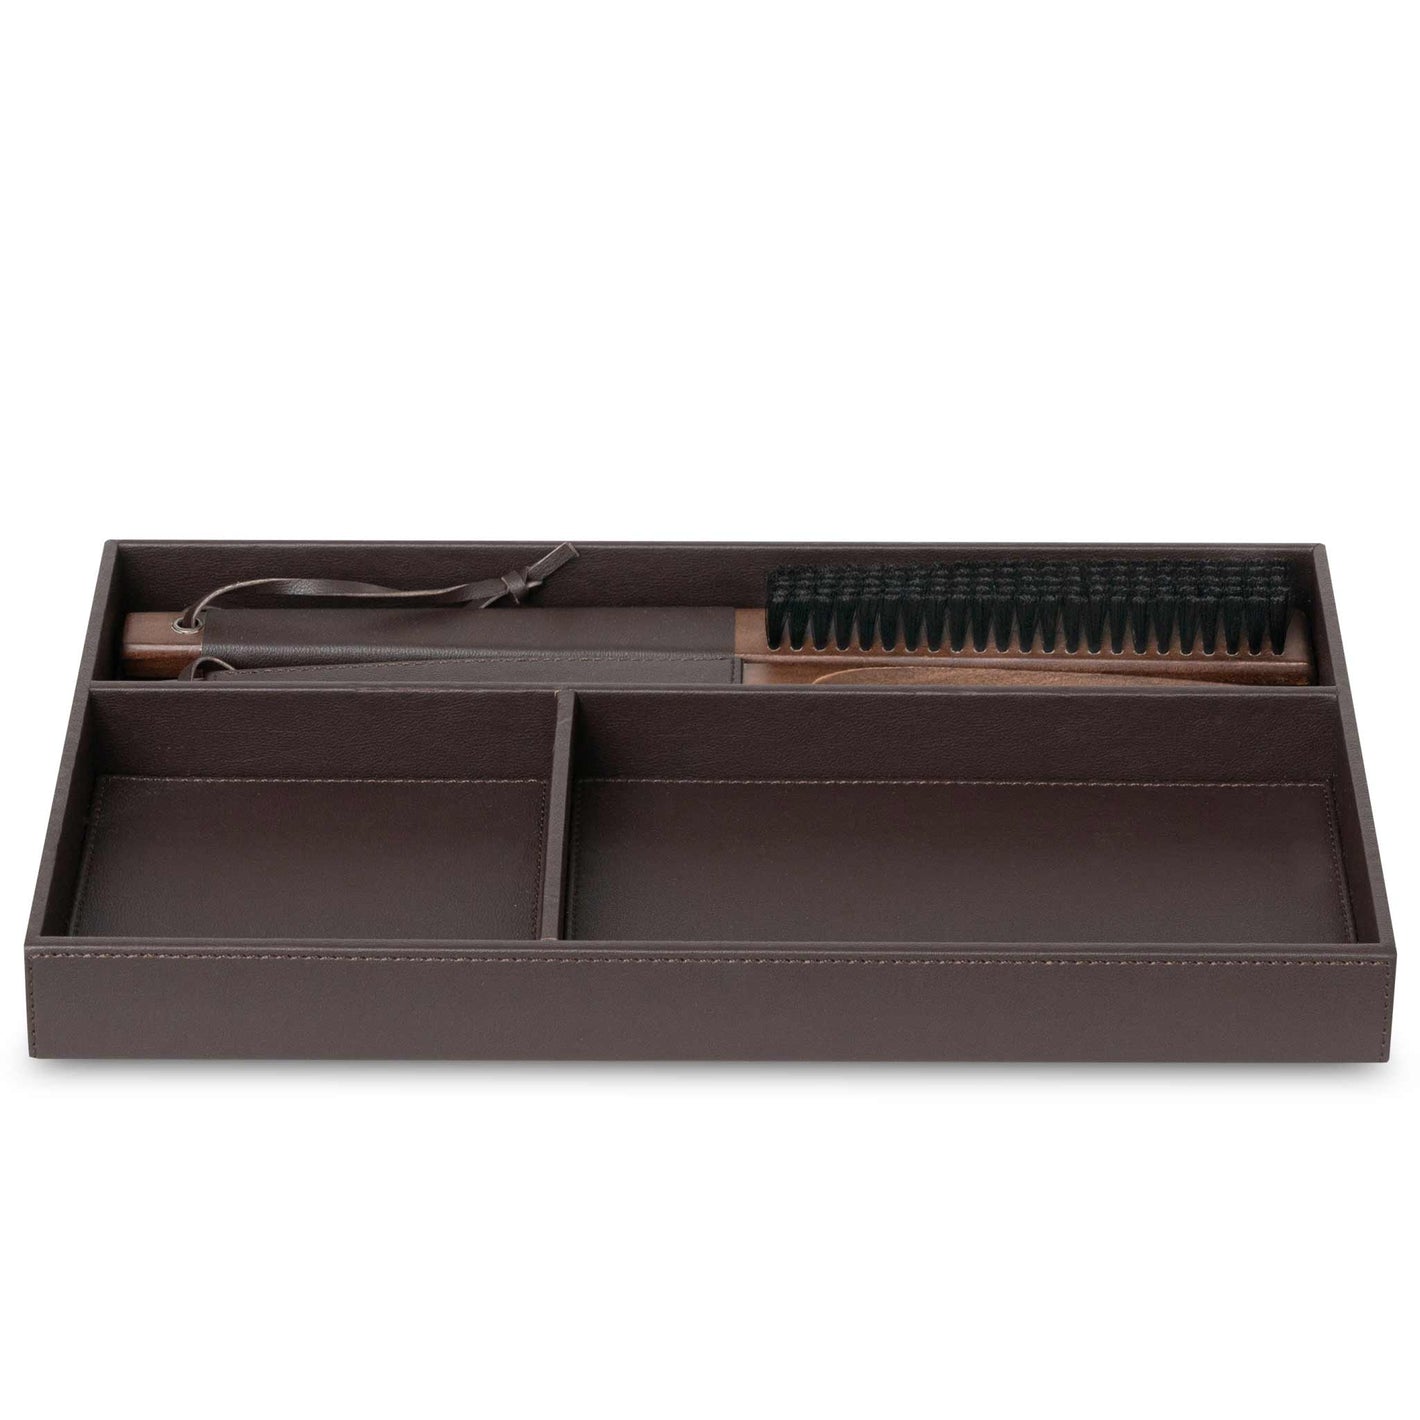 Bentley Cebu brown leather wardrobe organiser with shoe horn and clothes brush